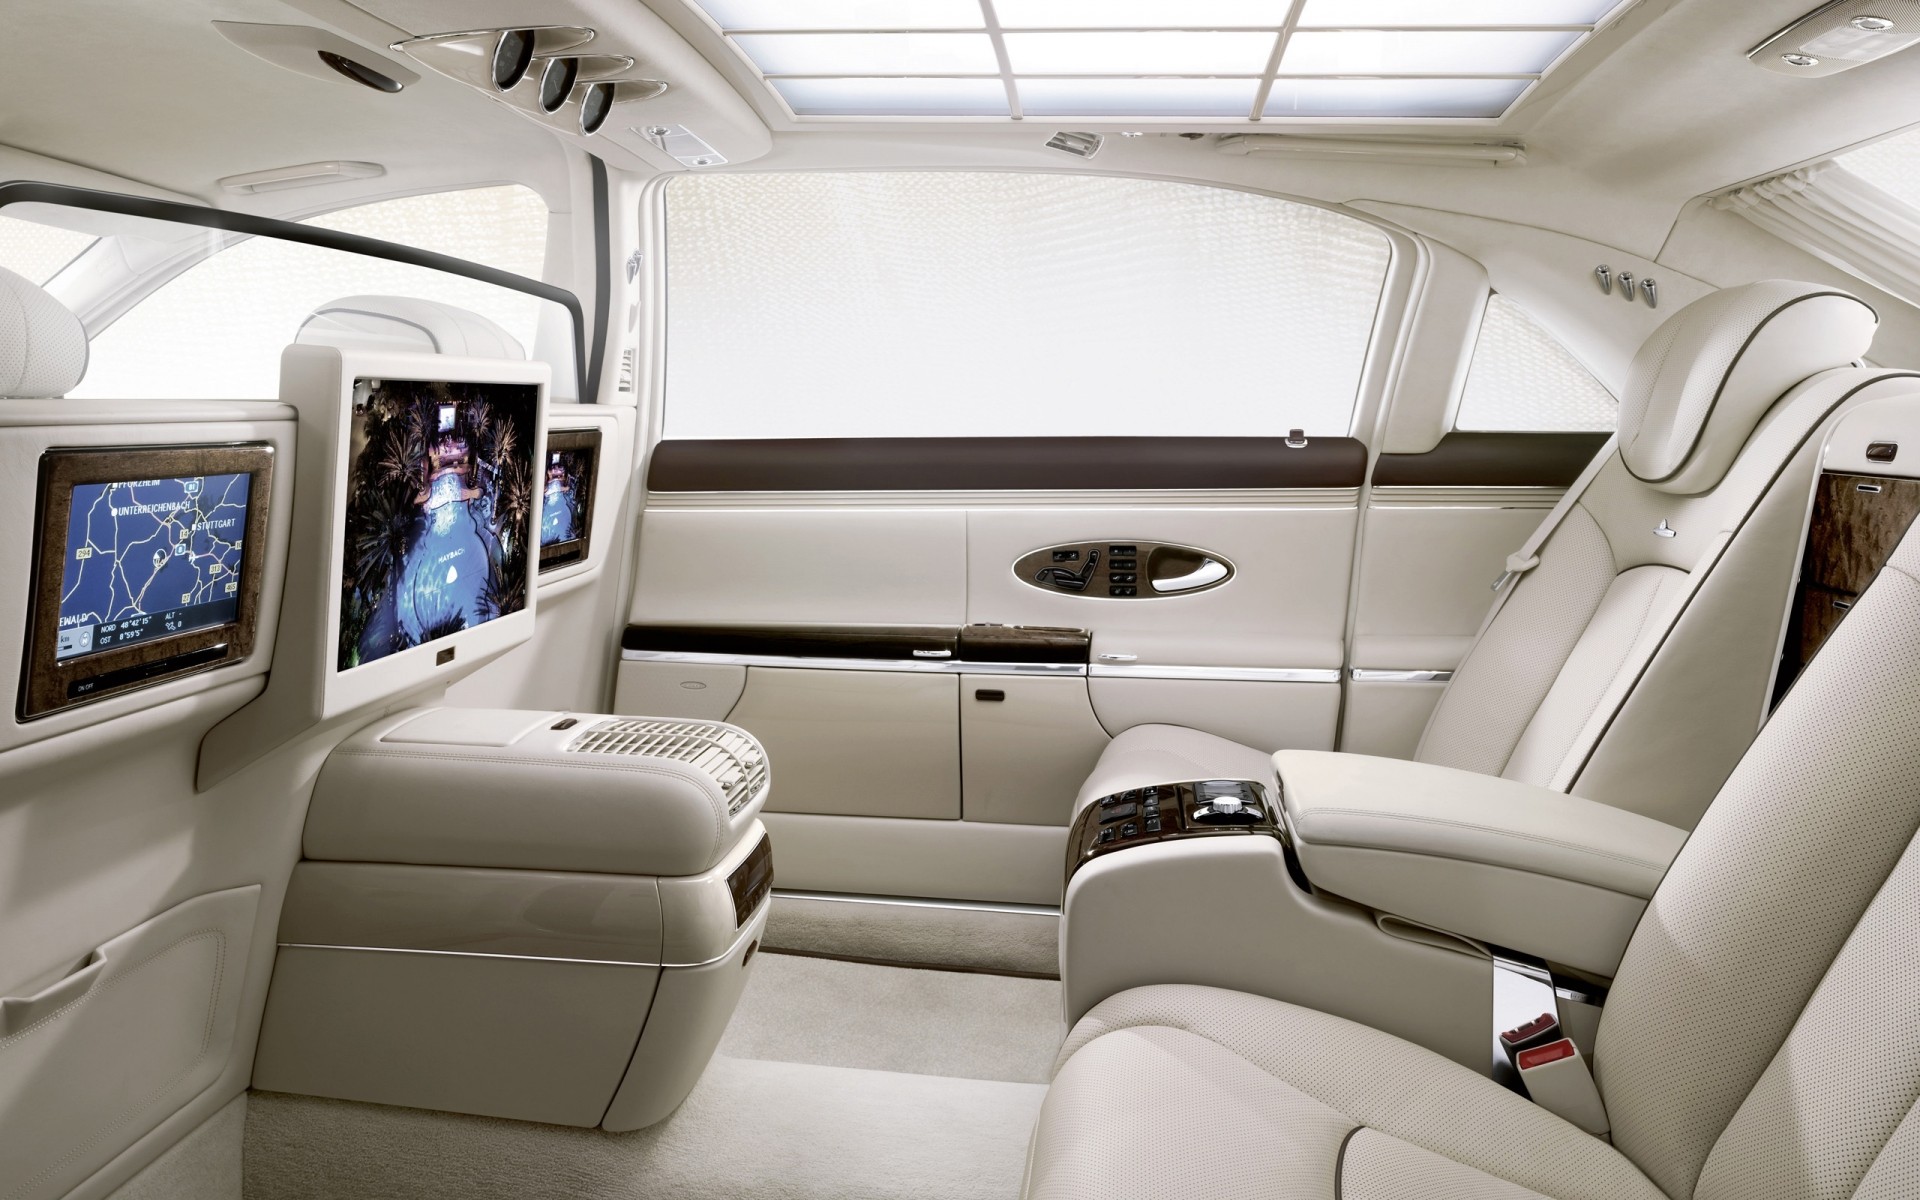 maybach seat indoors inside transportation system window cabin contemporary travel airplane business luxury empty furniture comfort